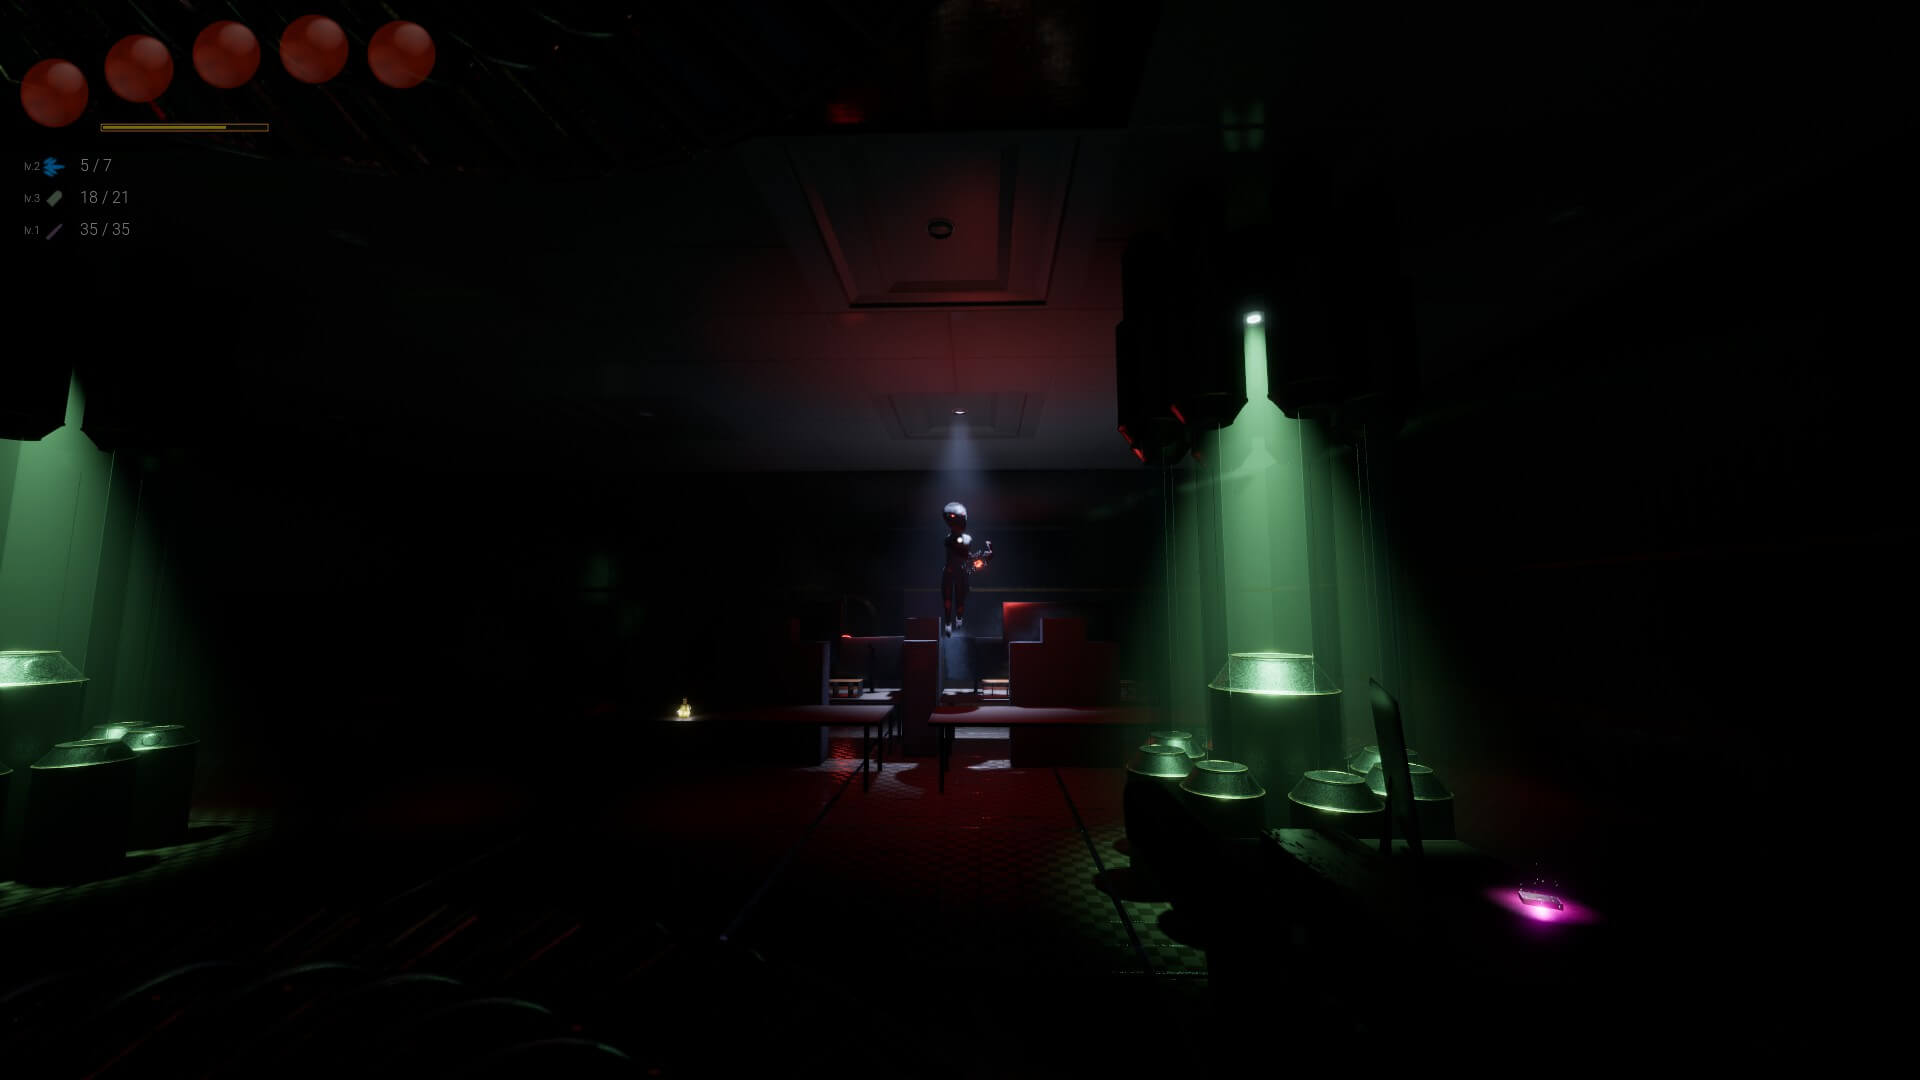 One of the enemies staring me down and preparing to attack. The area is very dark and I'm using the metal contraption on the right to help illuminate the space.